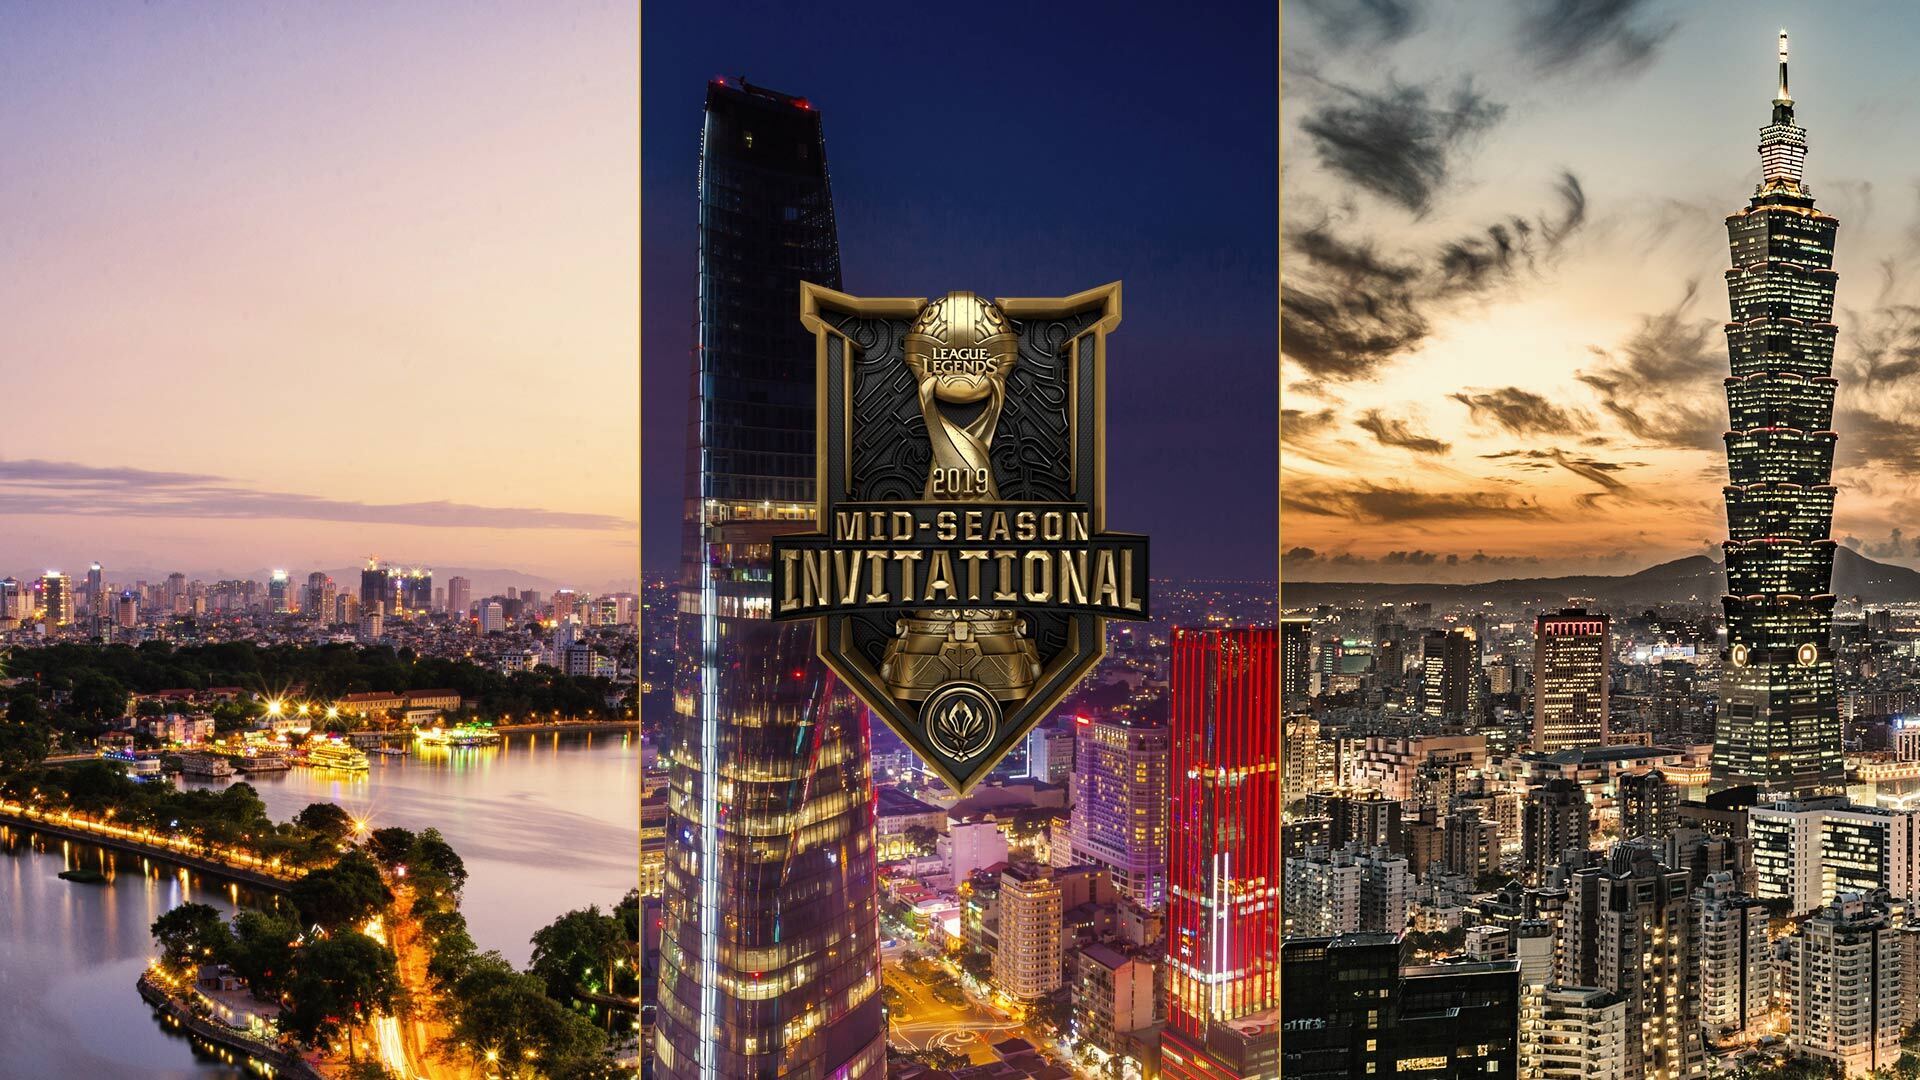 MSI will being with the Play-In Stage in Hanoi, then the Group Stage in Ho Chi Minh City before ending in Taipei for the Semifinals and Finals.